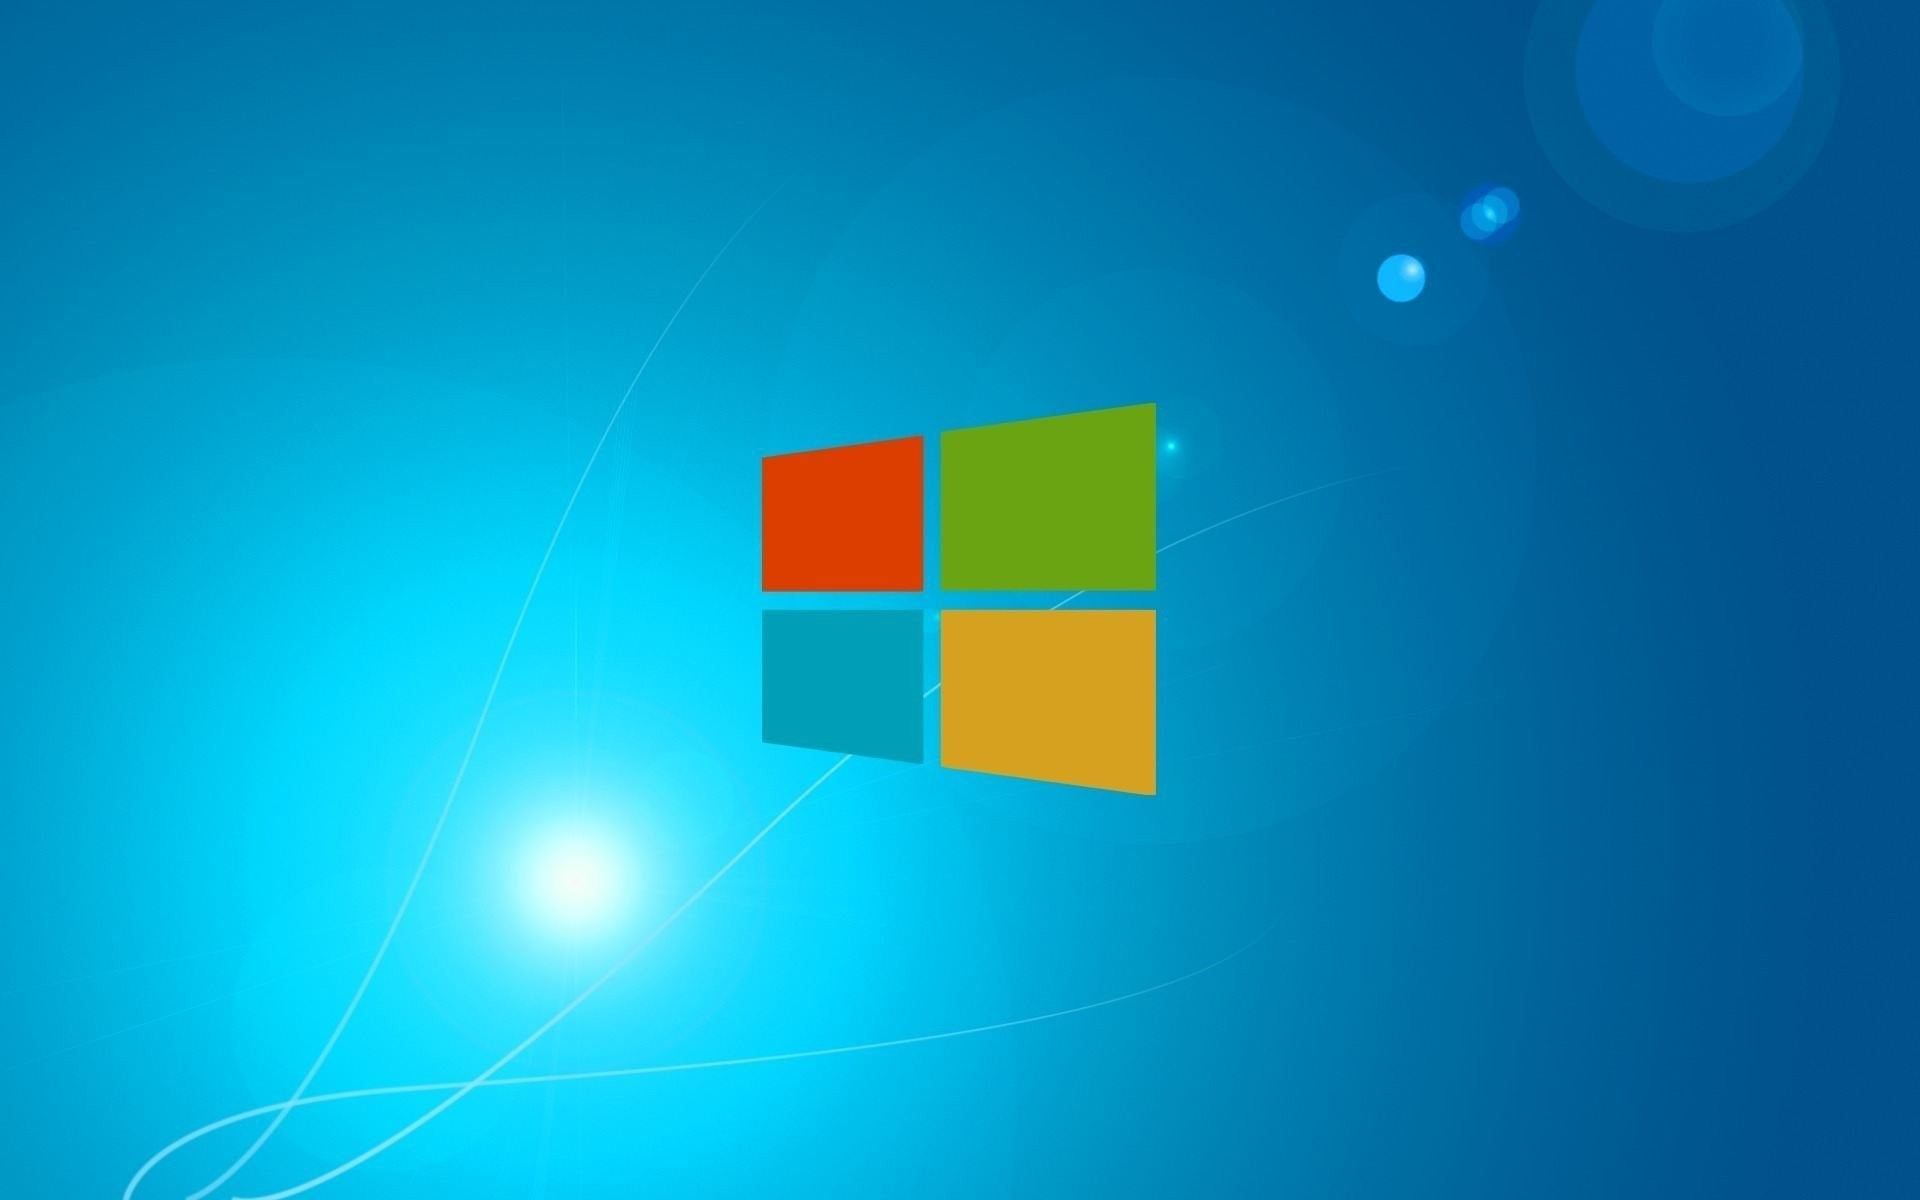 Blue PC Operating Systems Creativity Background Color Windows 8 Fresh New Best Quality. Microsoft wallpaper, Desktop wallpaper art, Colorful background